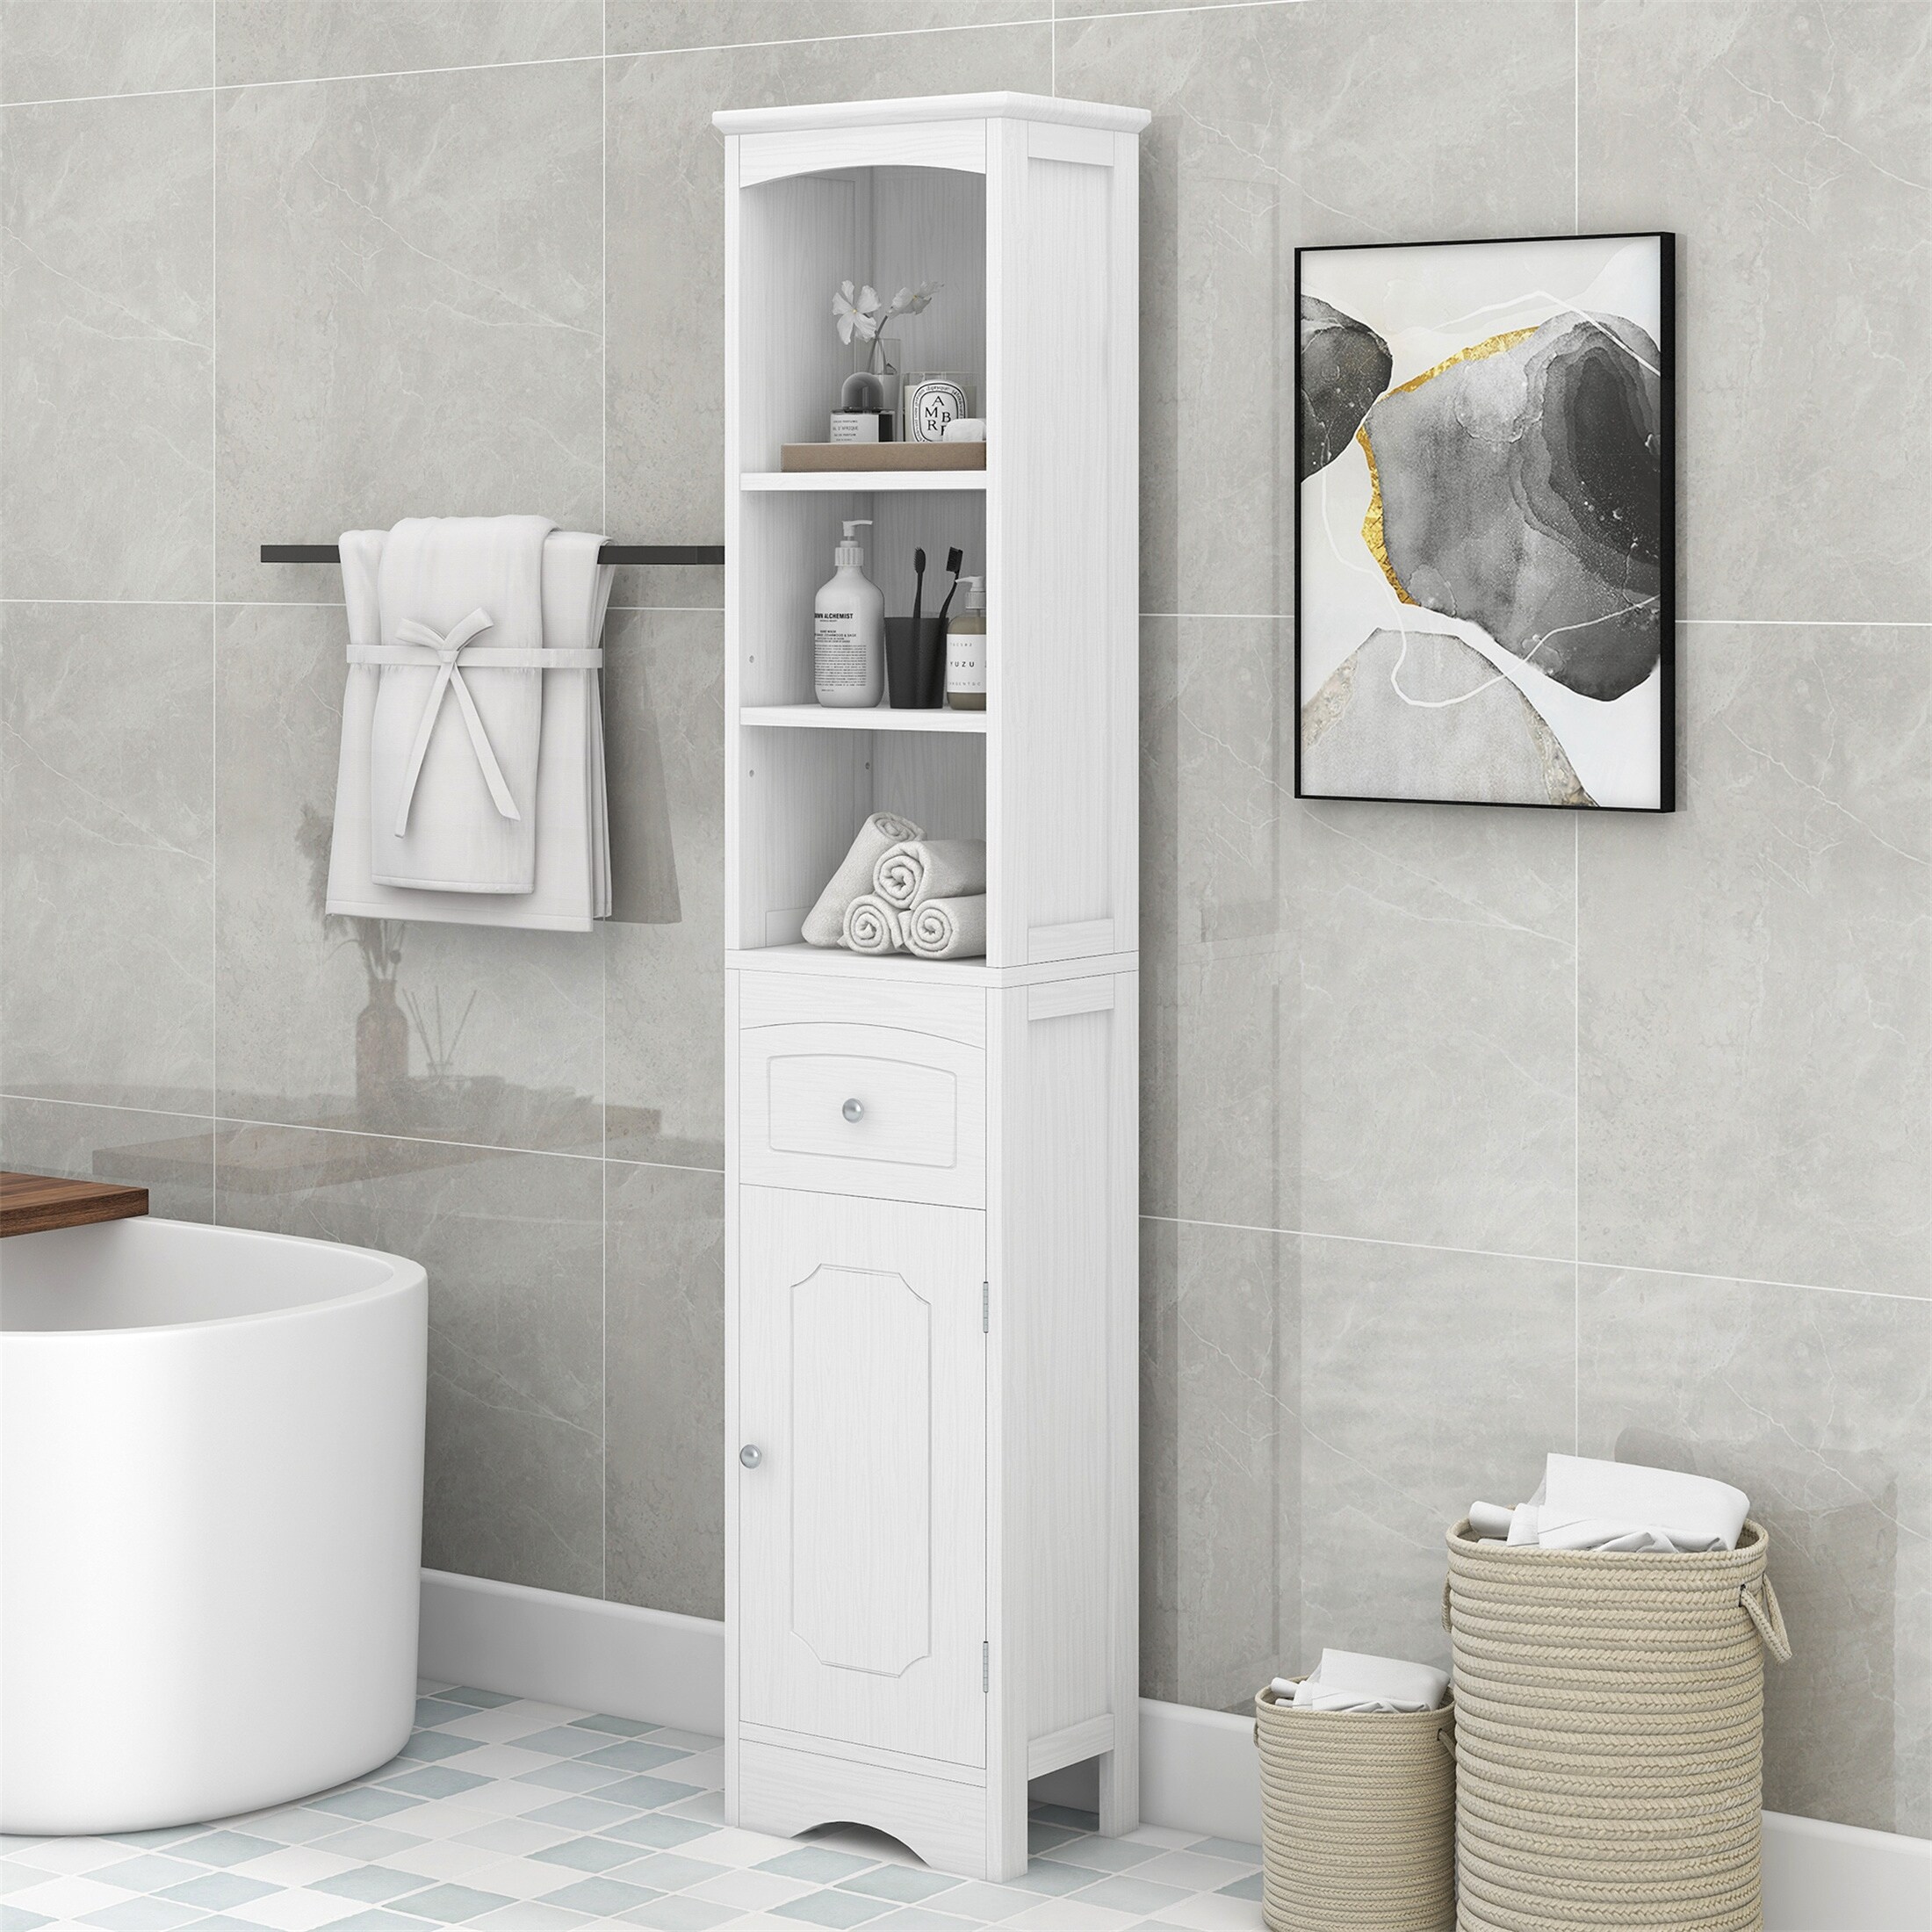 https://ak1.ostkcdn.com/images/products/is/images/direct/d79ea4e59804c06e71d293e709d45730179599b7/Tall-Bathroom-Cabinet%2C-Freestanding-Storage-Cabinet-with-Drawer%2C-White.jpg